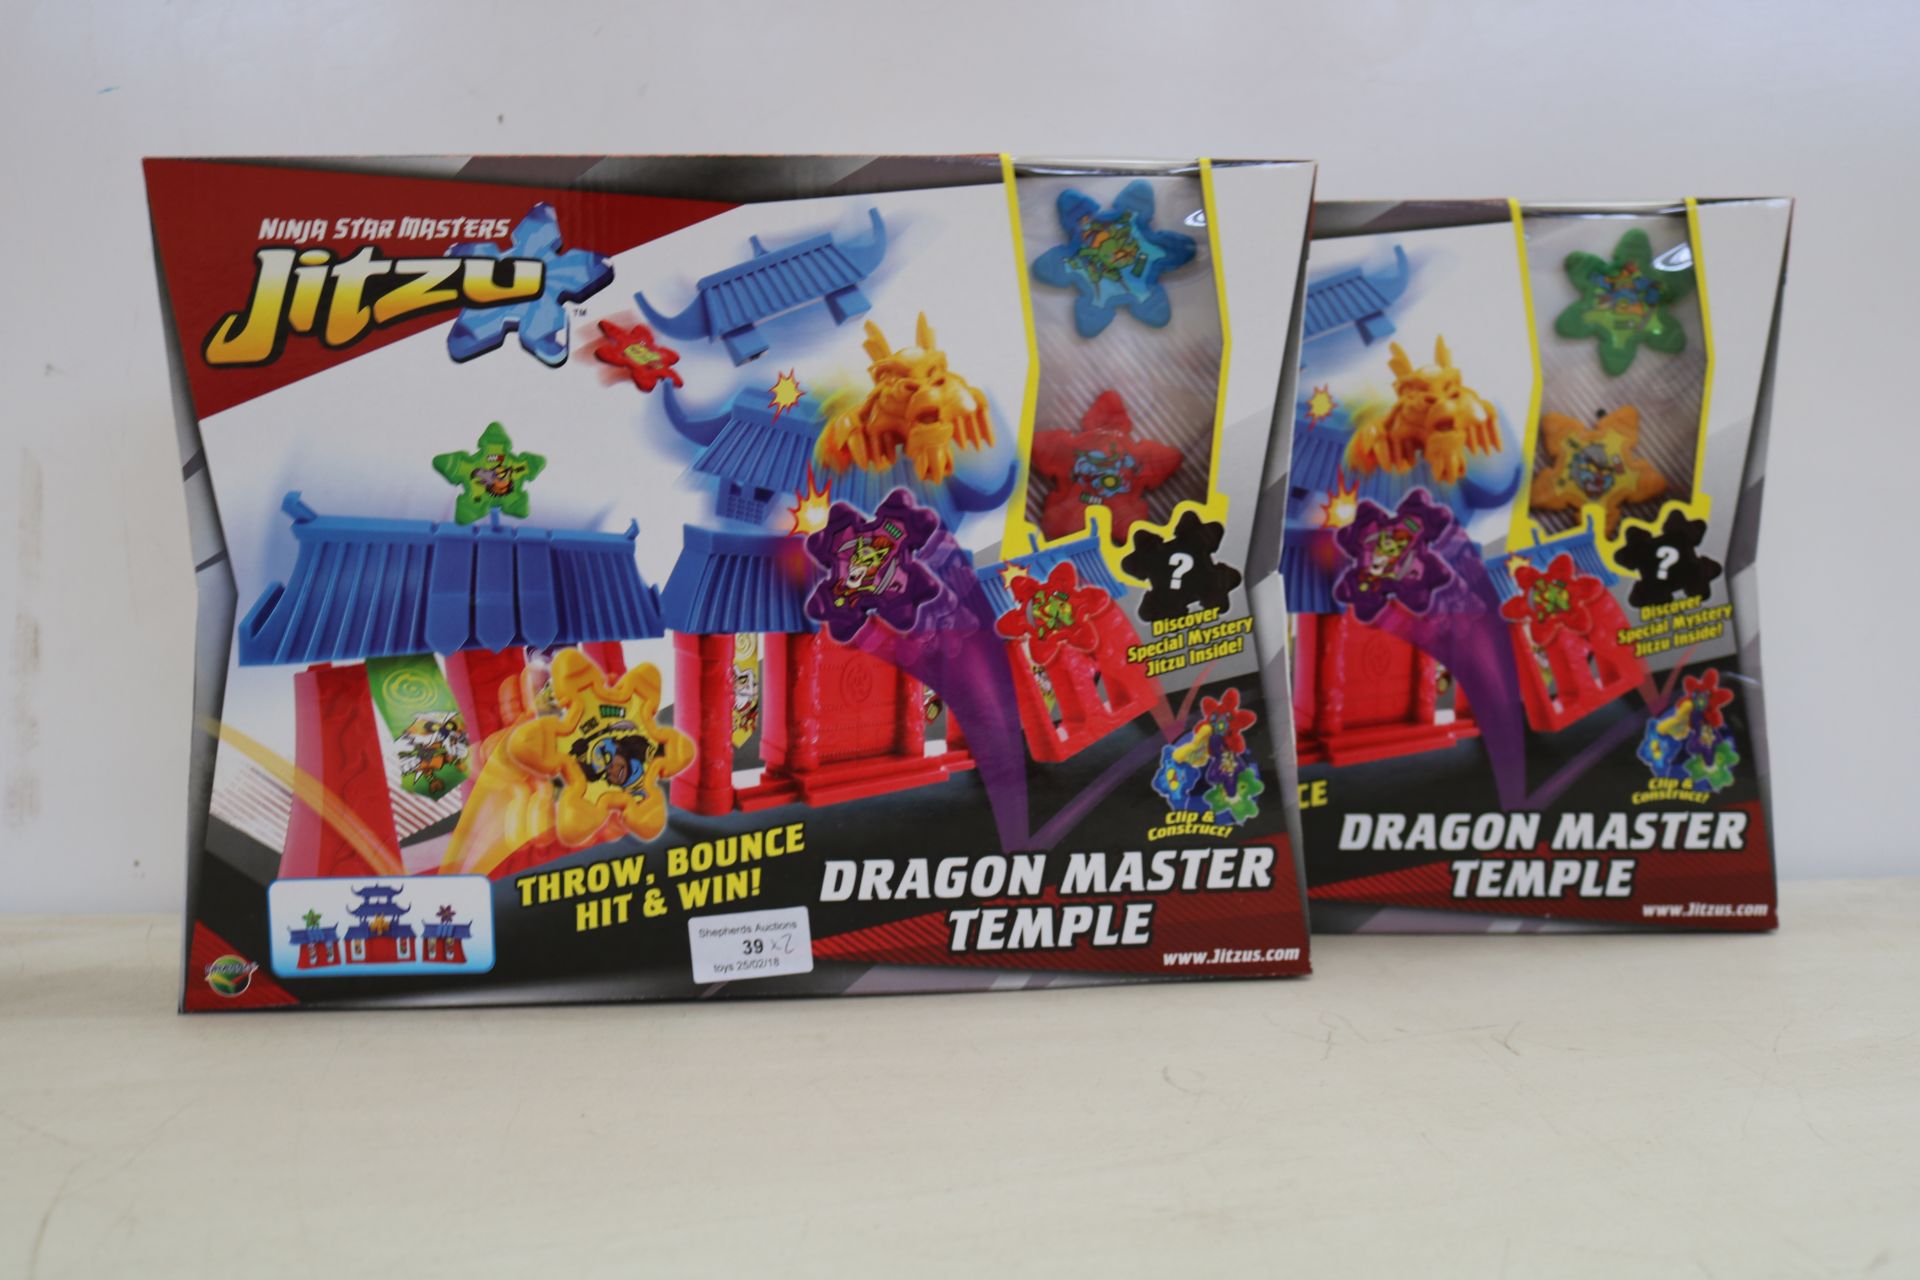 2x Jitzu dragon master temple game, new and boxed.